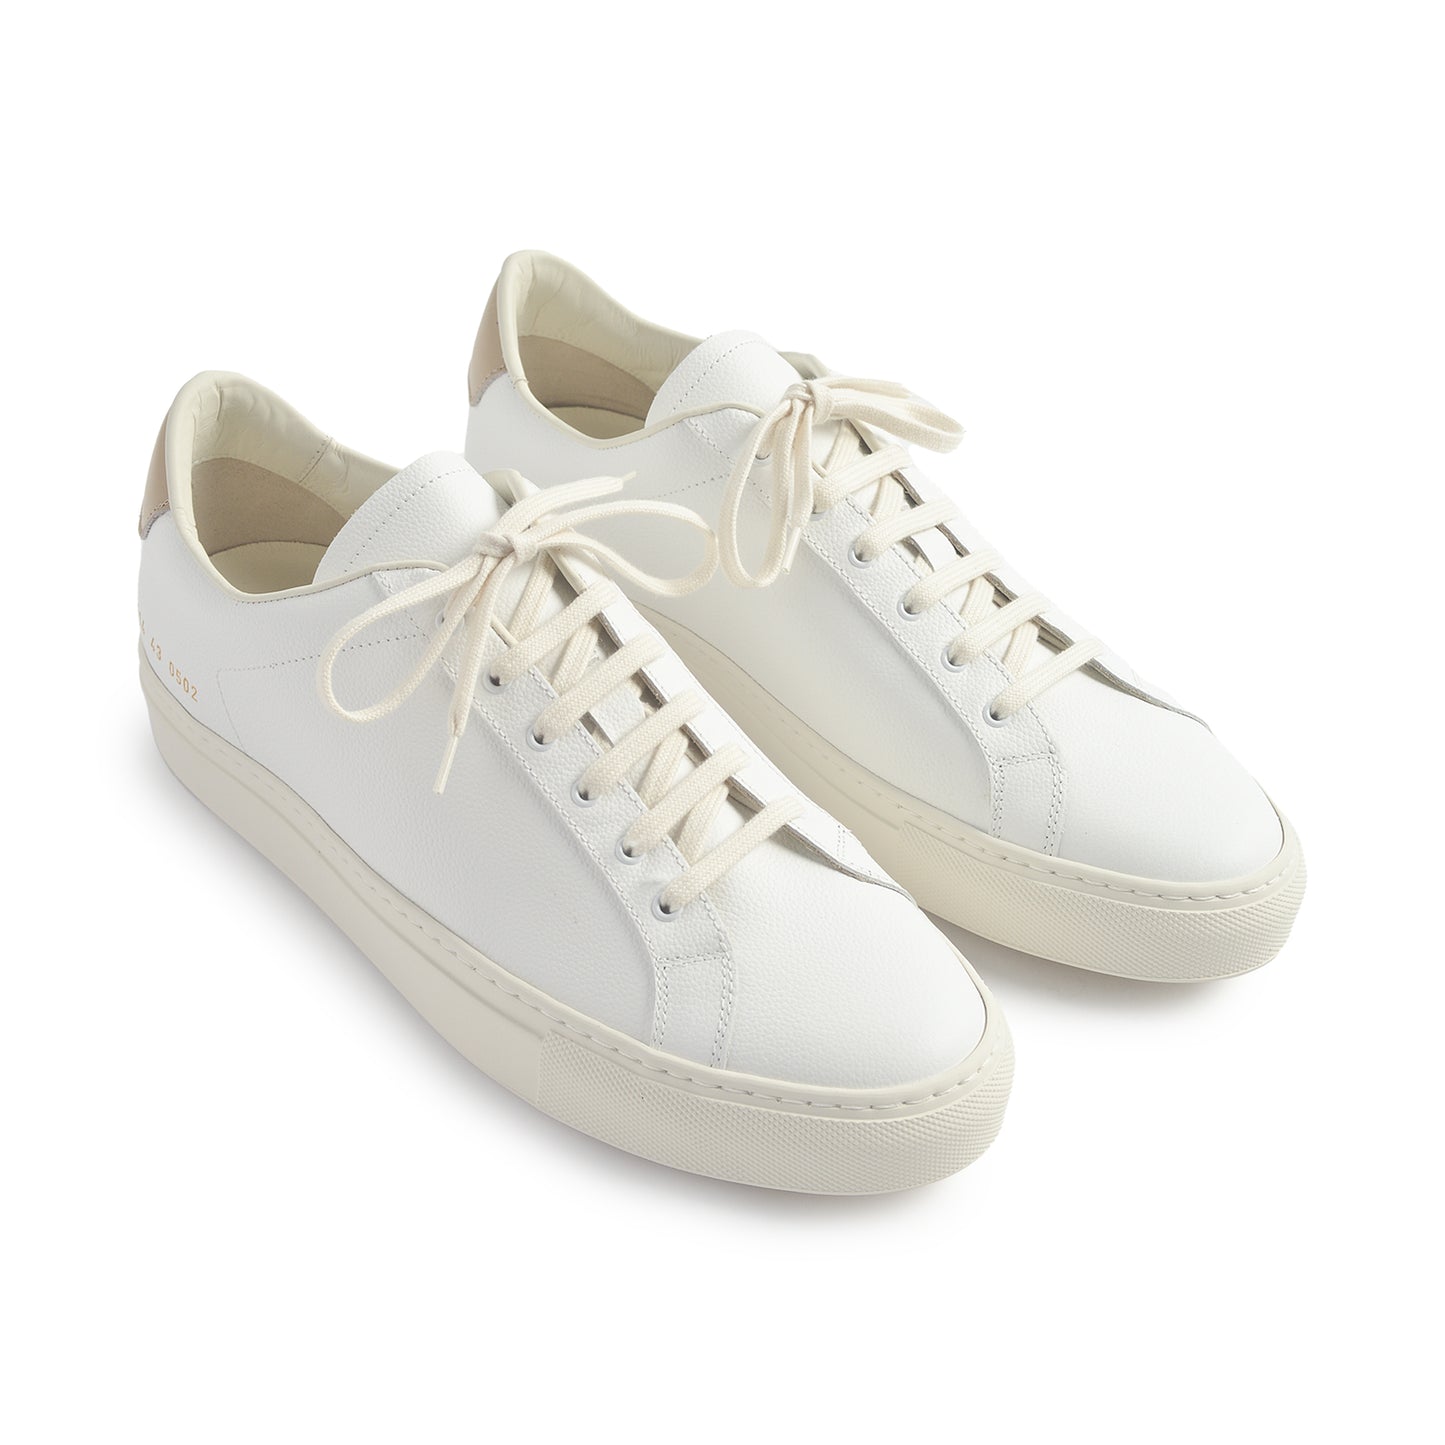 Common Projects Retro Bumpy Sneakers